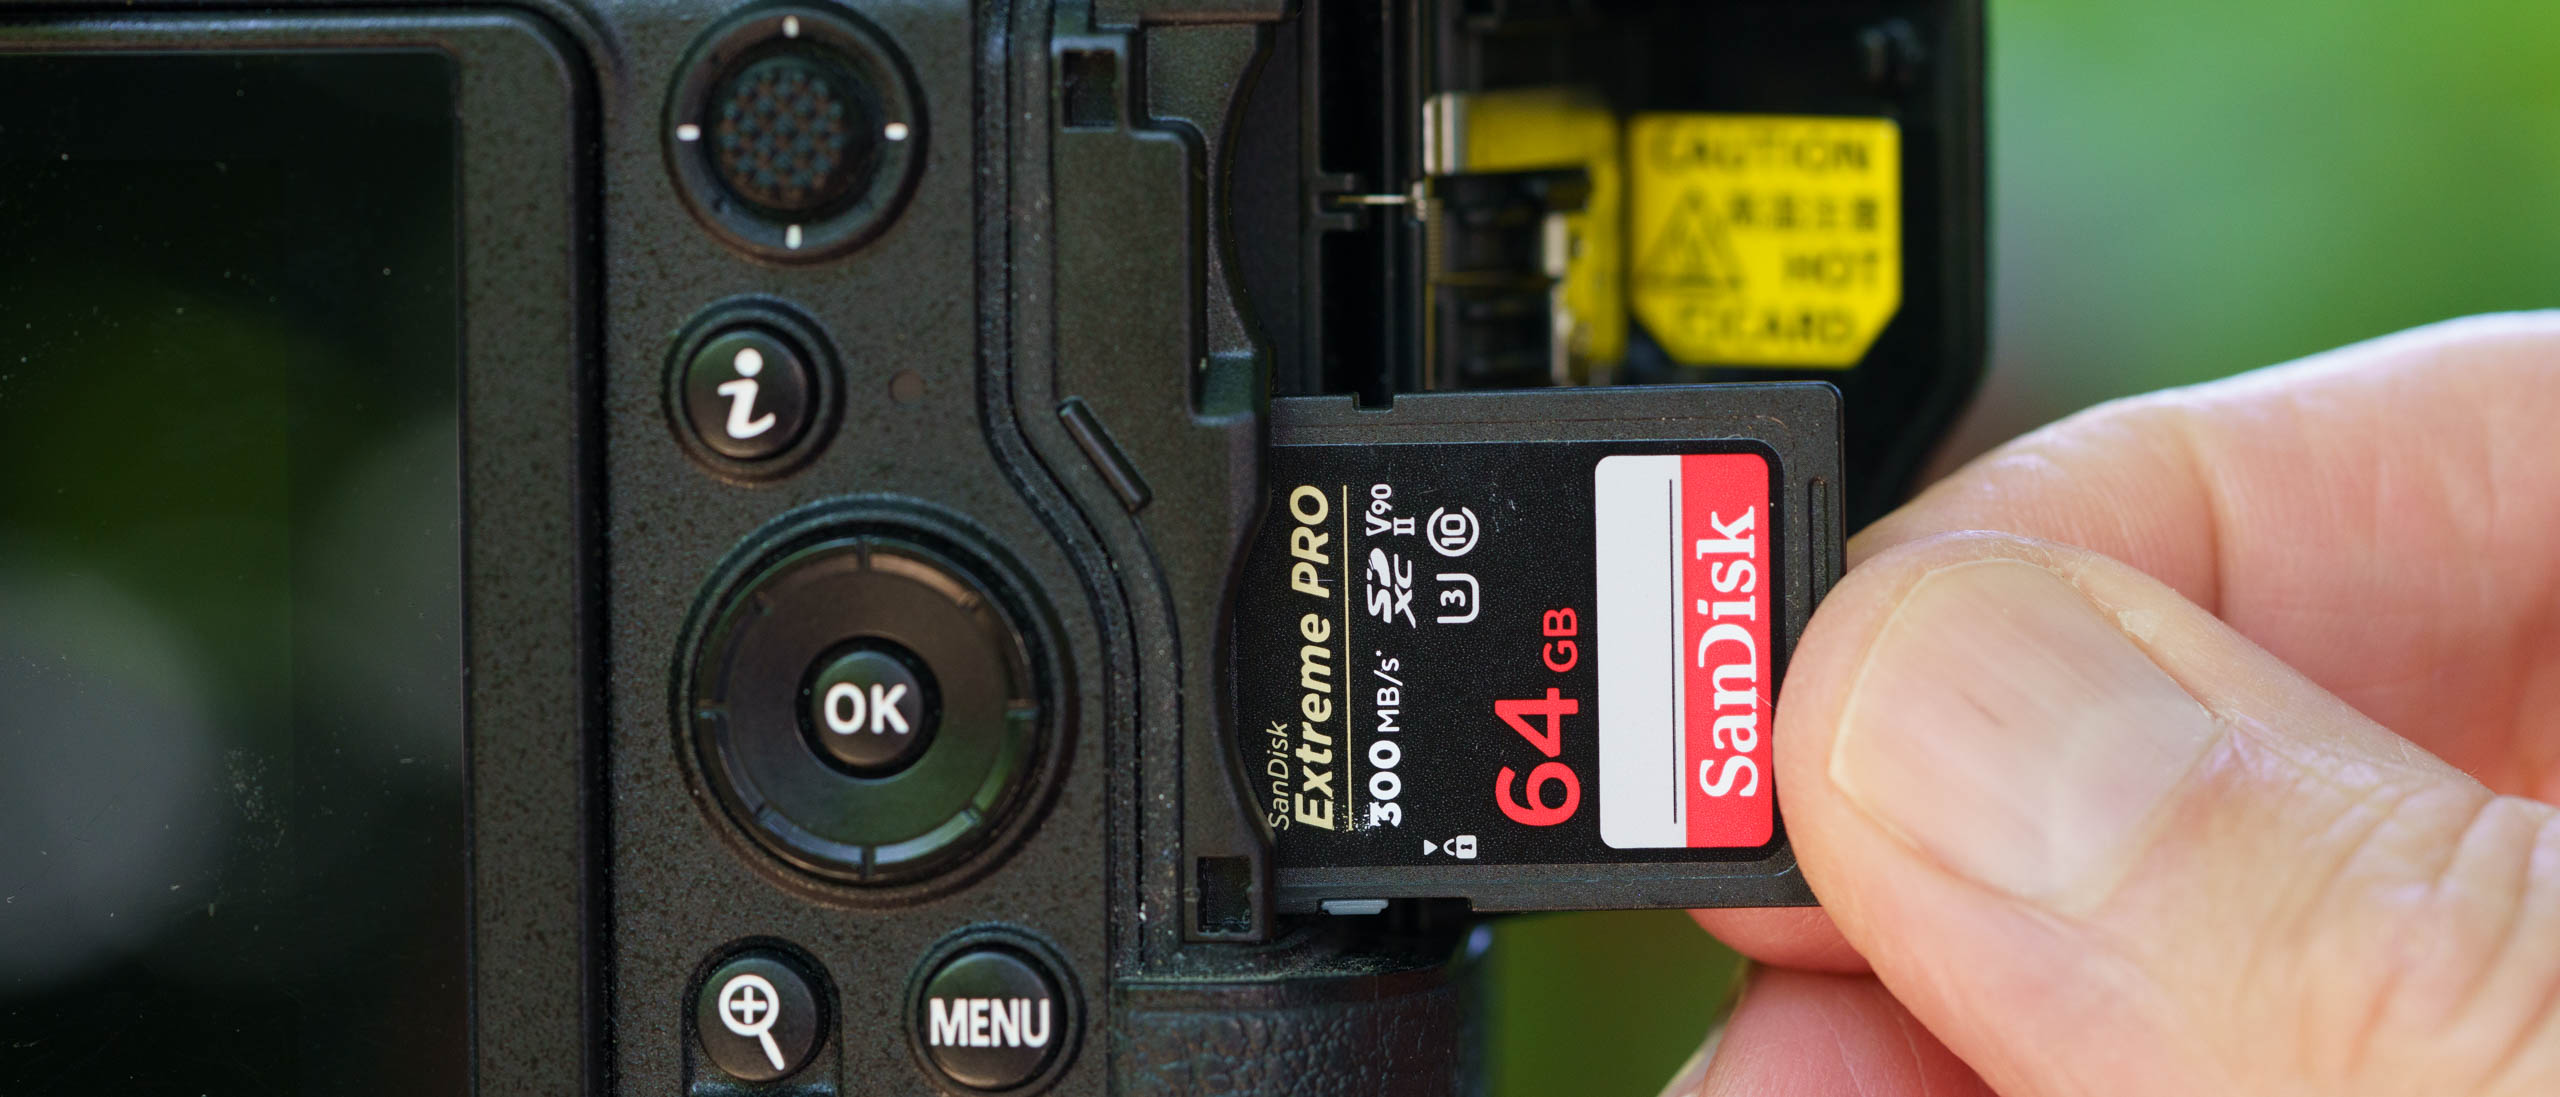 SanDisk Extreme PRO SD Card Review 